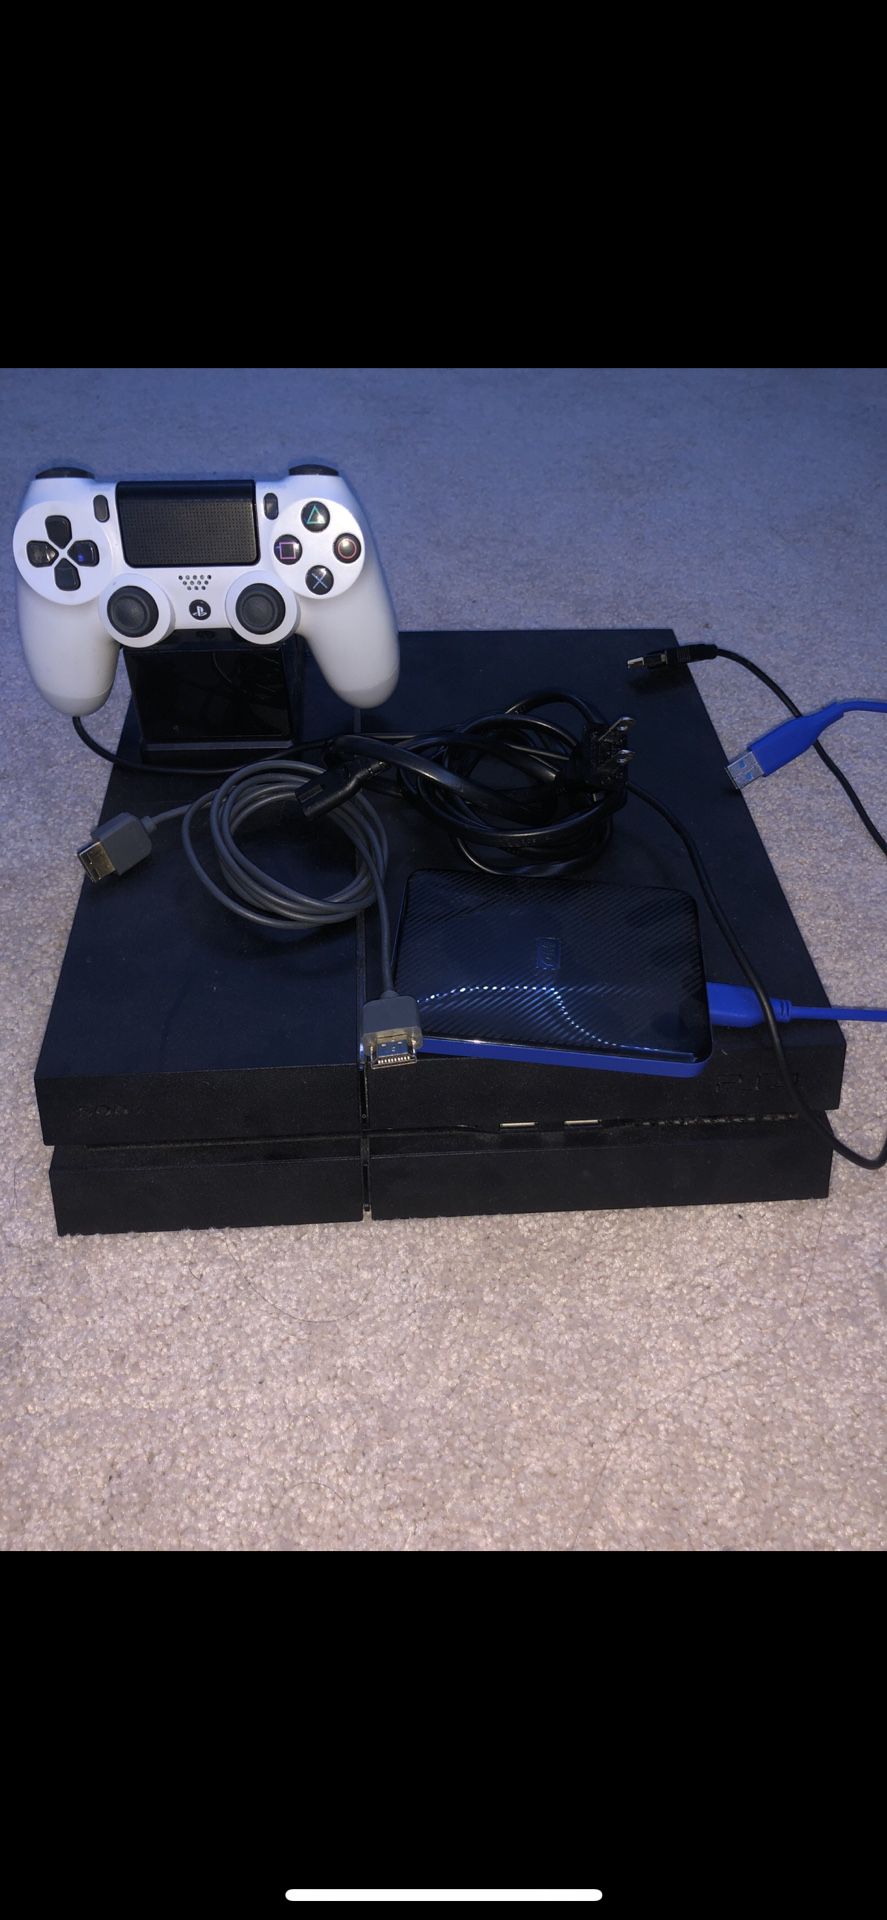 PS4 - 500 GB with 2TB External Hard Drive